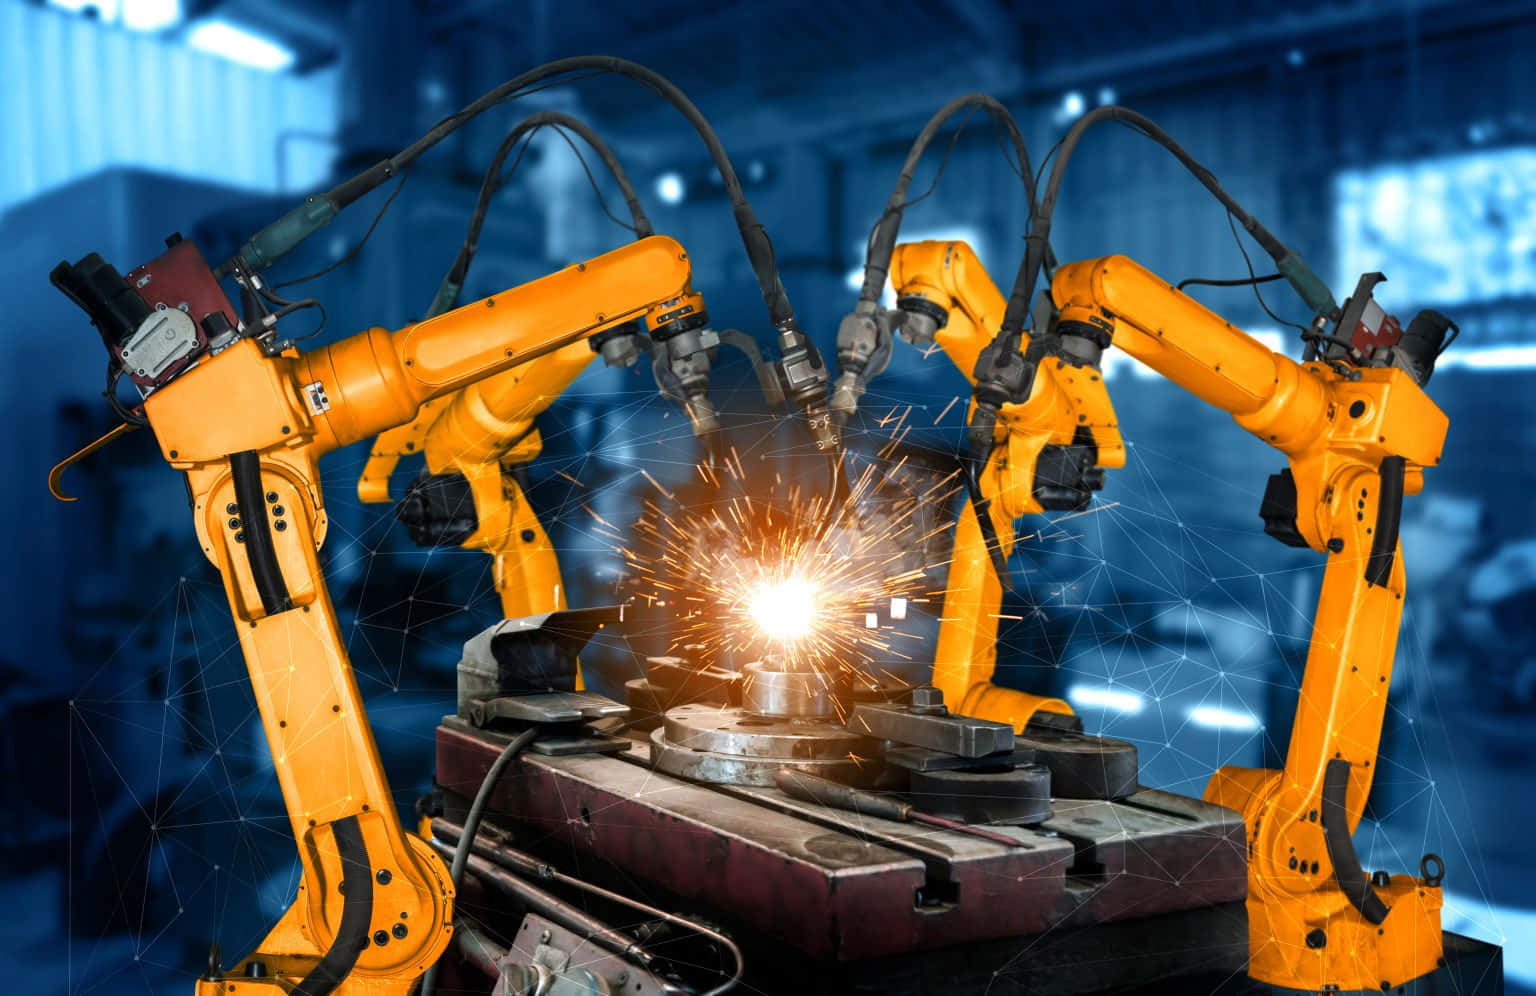 Automated robots working in unison in a precision manufacturing facility Wallpaper